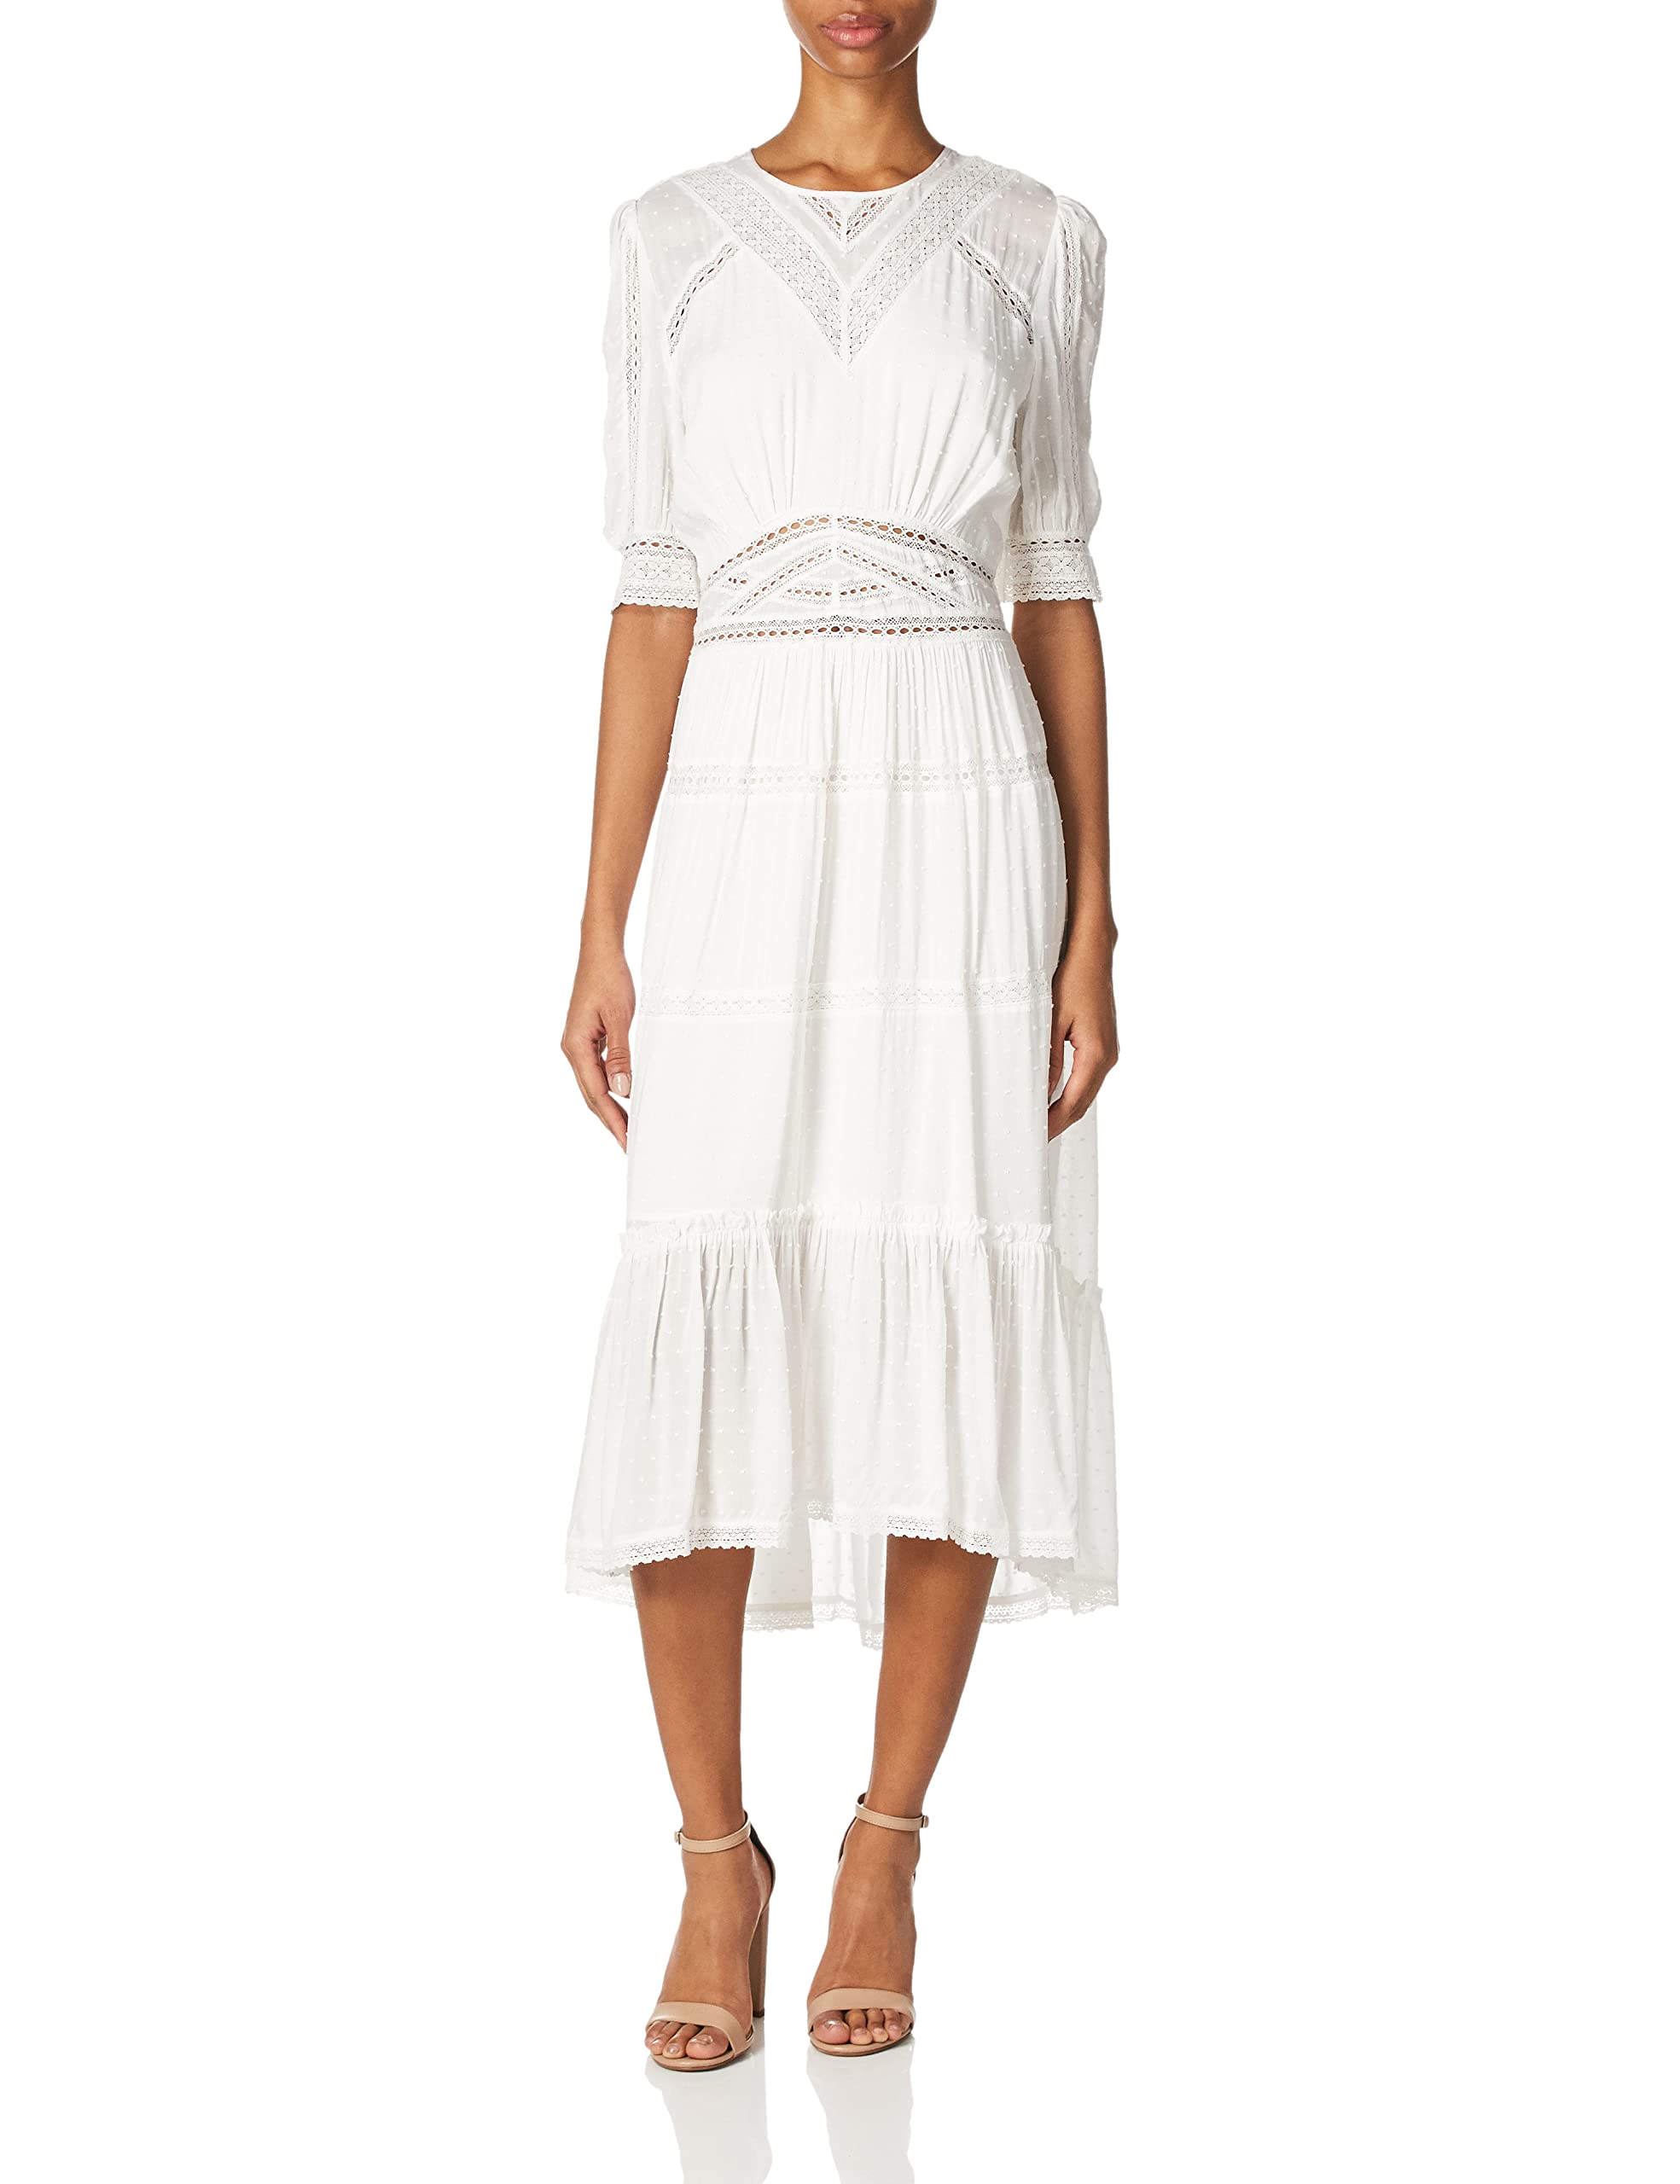 The Kooples Women's Long Dress with Mid-Length Sleeves